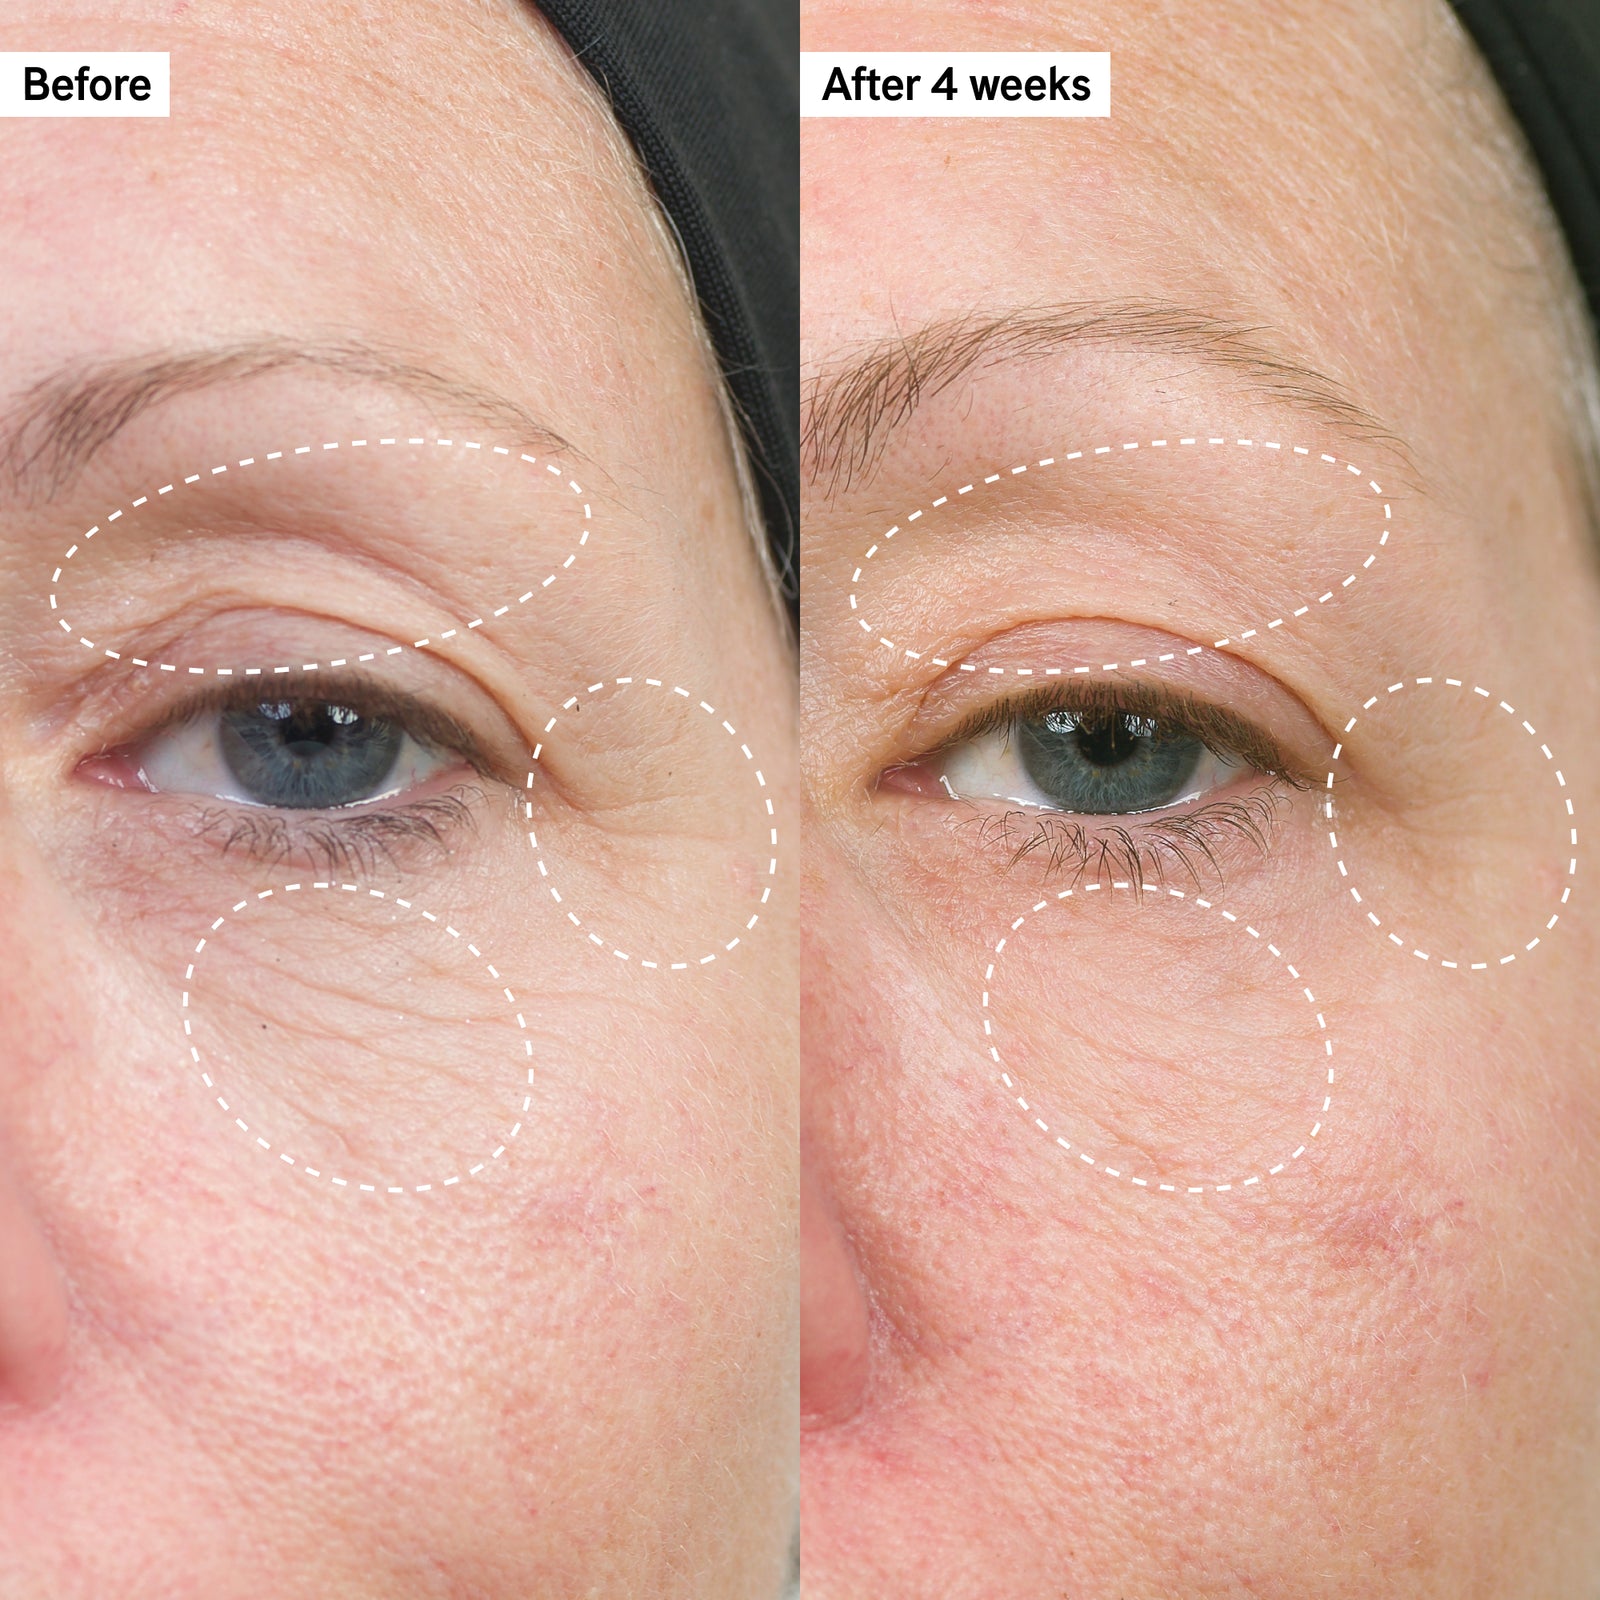 Before and after images to show Bio-Active Ceramide Repairing and Plumping Moisturizer results after 4 weeks